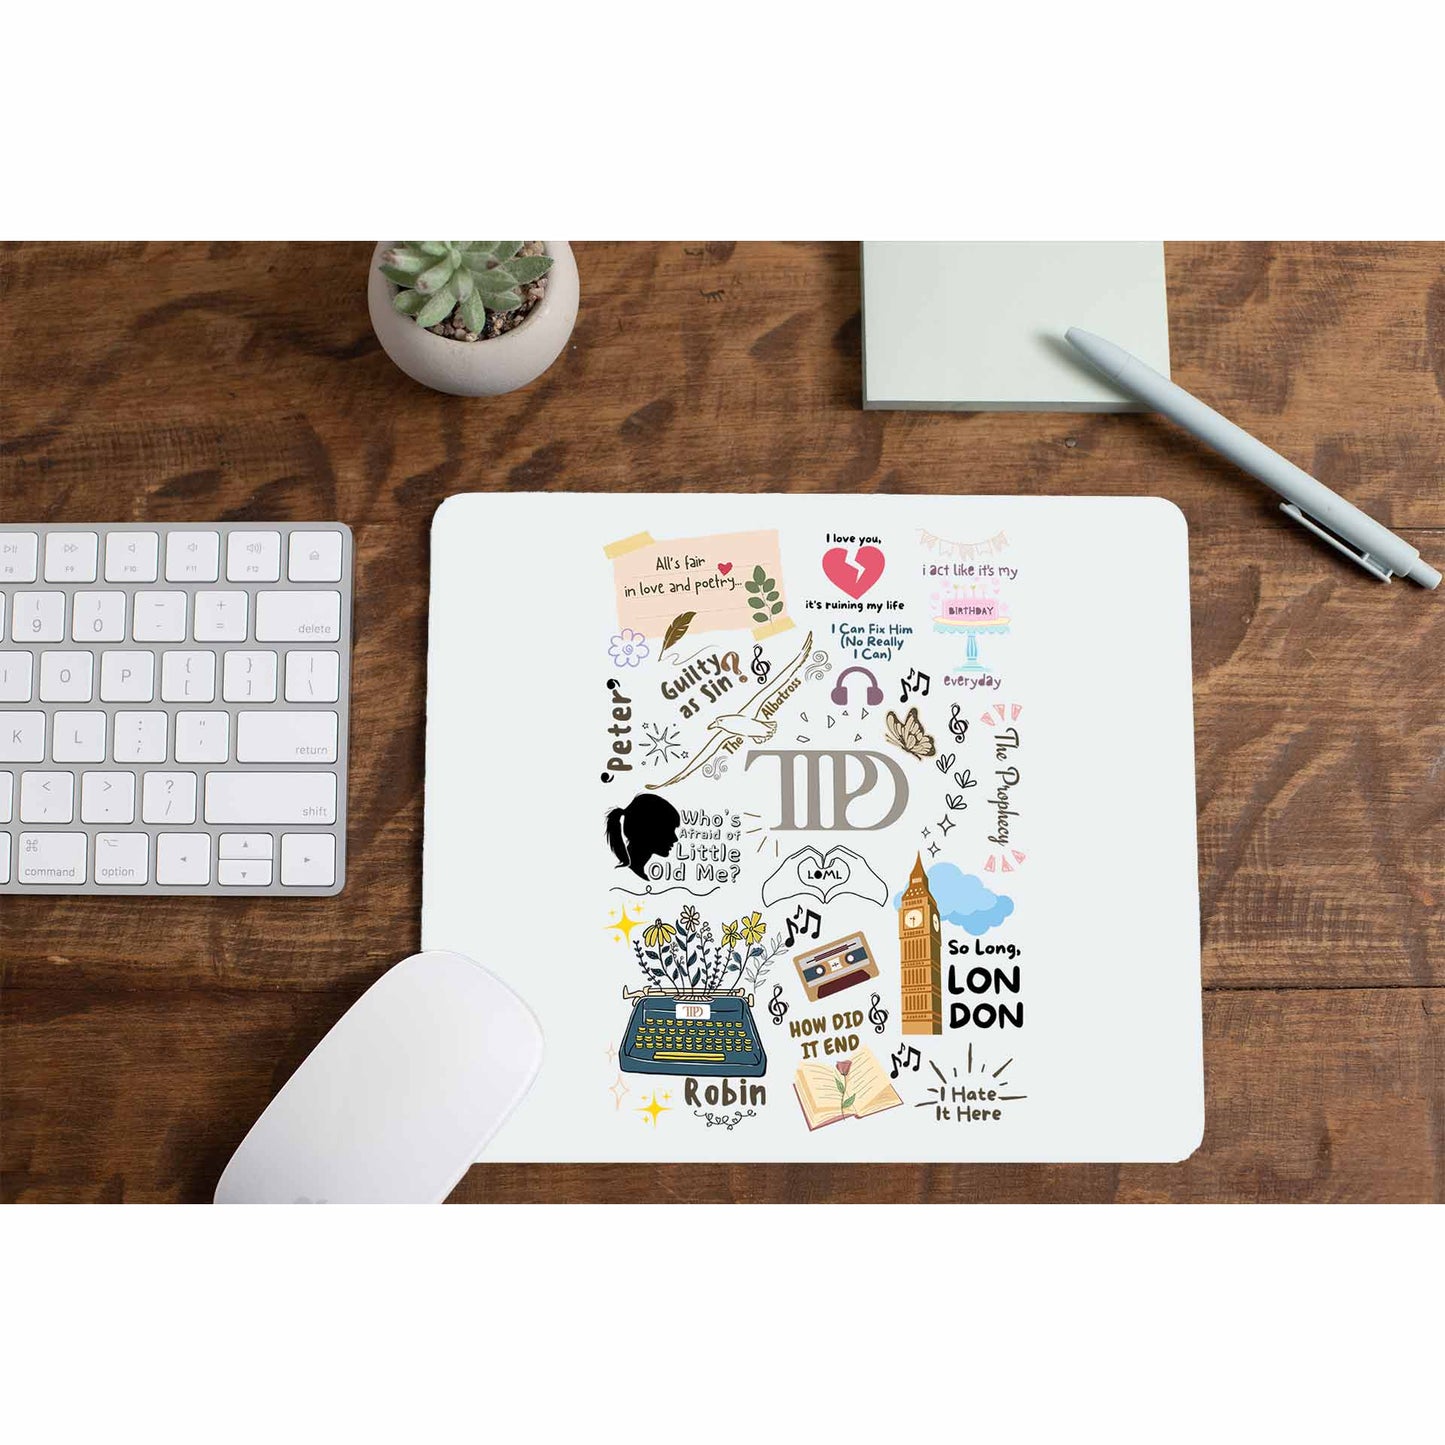 taylor swift a poet's doodle mousepad logitech large music band buy online united states of america usa the banyan tee tbt men women girls boys unisex